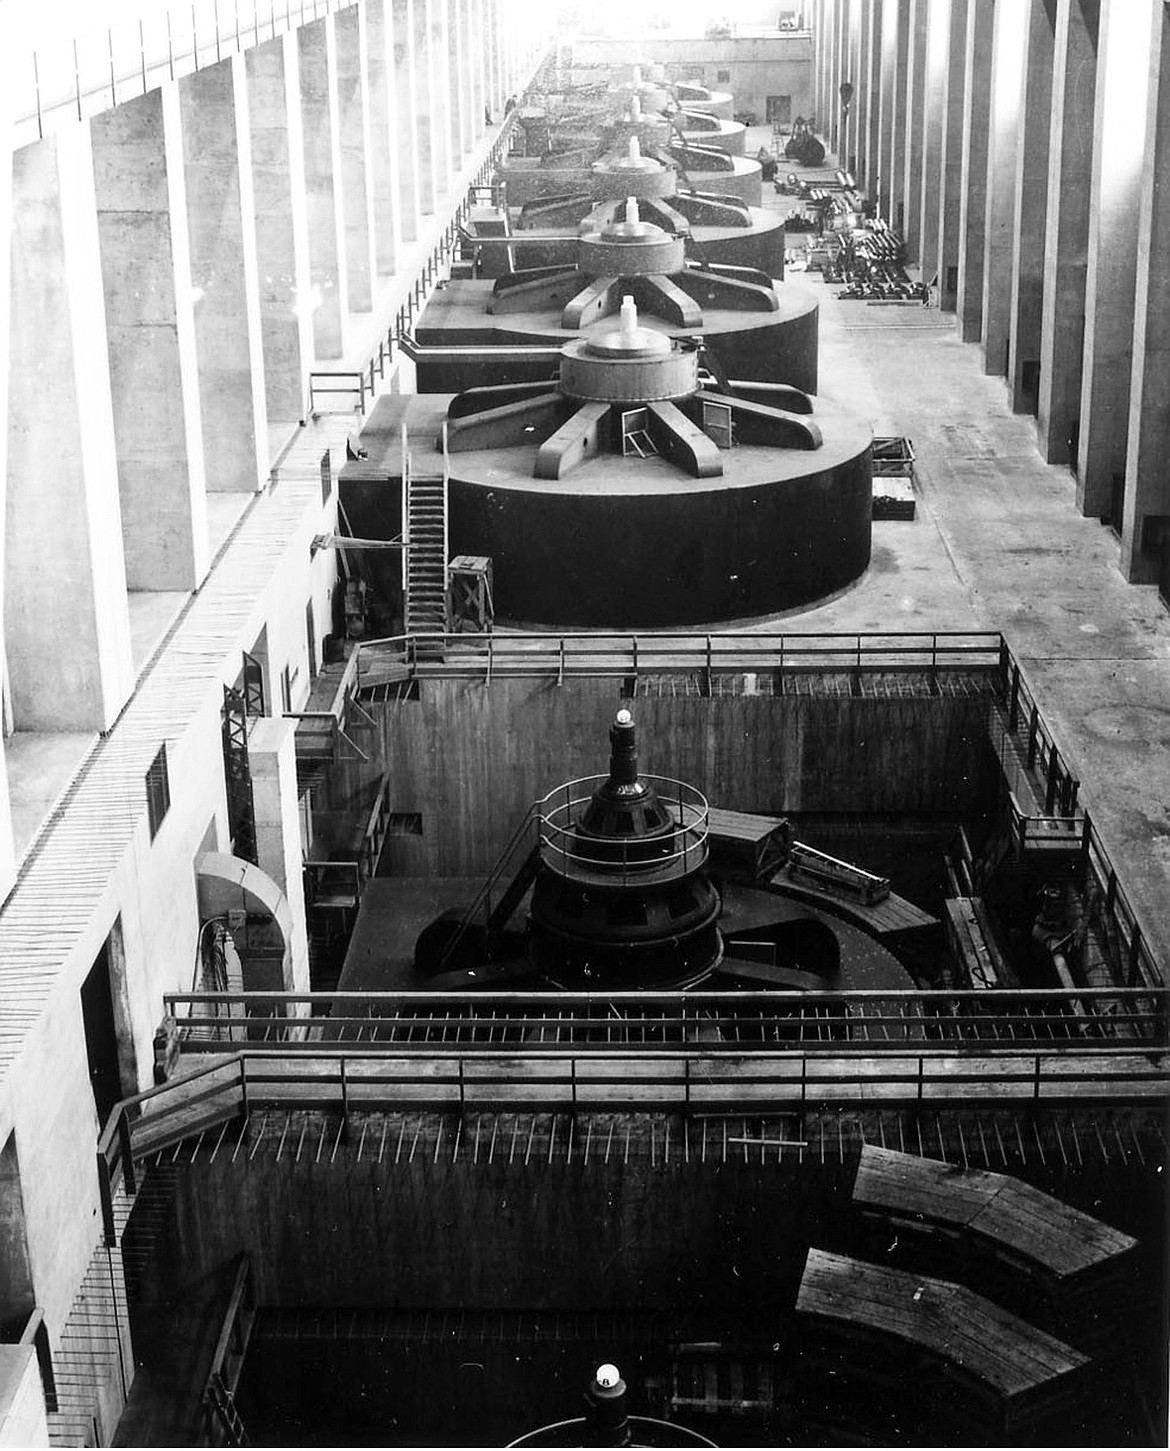 The west powerhouse in 1943. With the coming of World War II, the concerns about the dam producing more electricity than the region could use turned out to be unfounded.